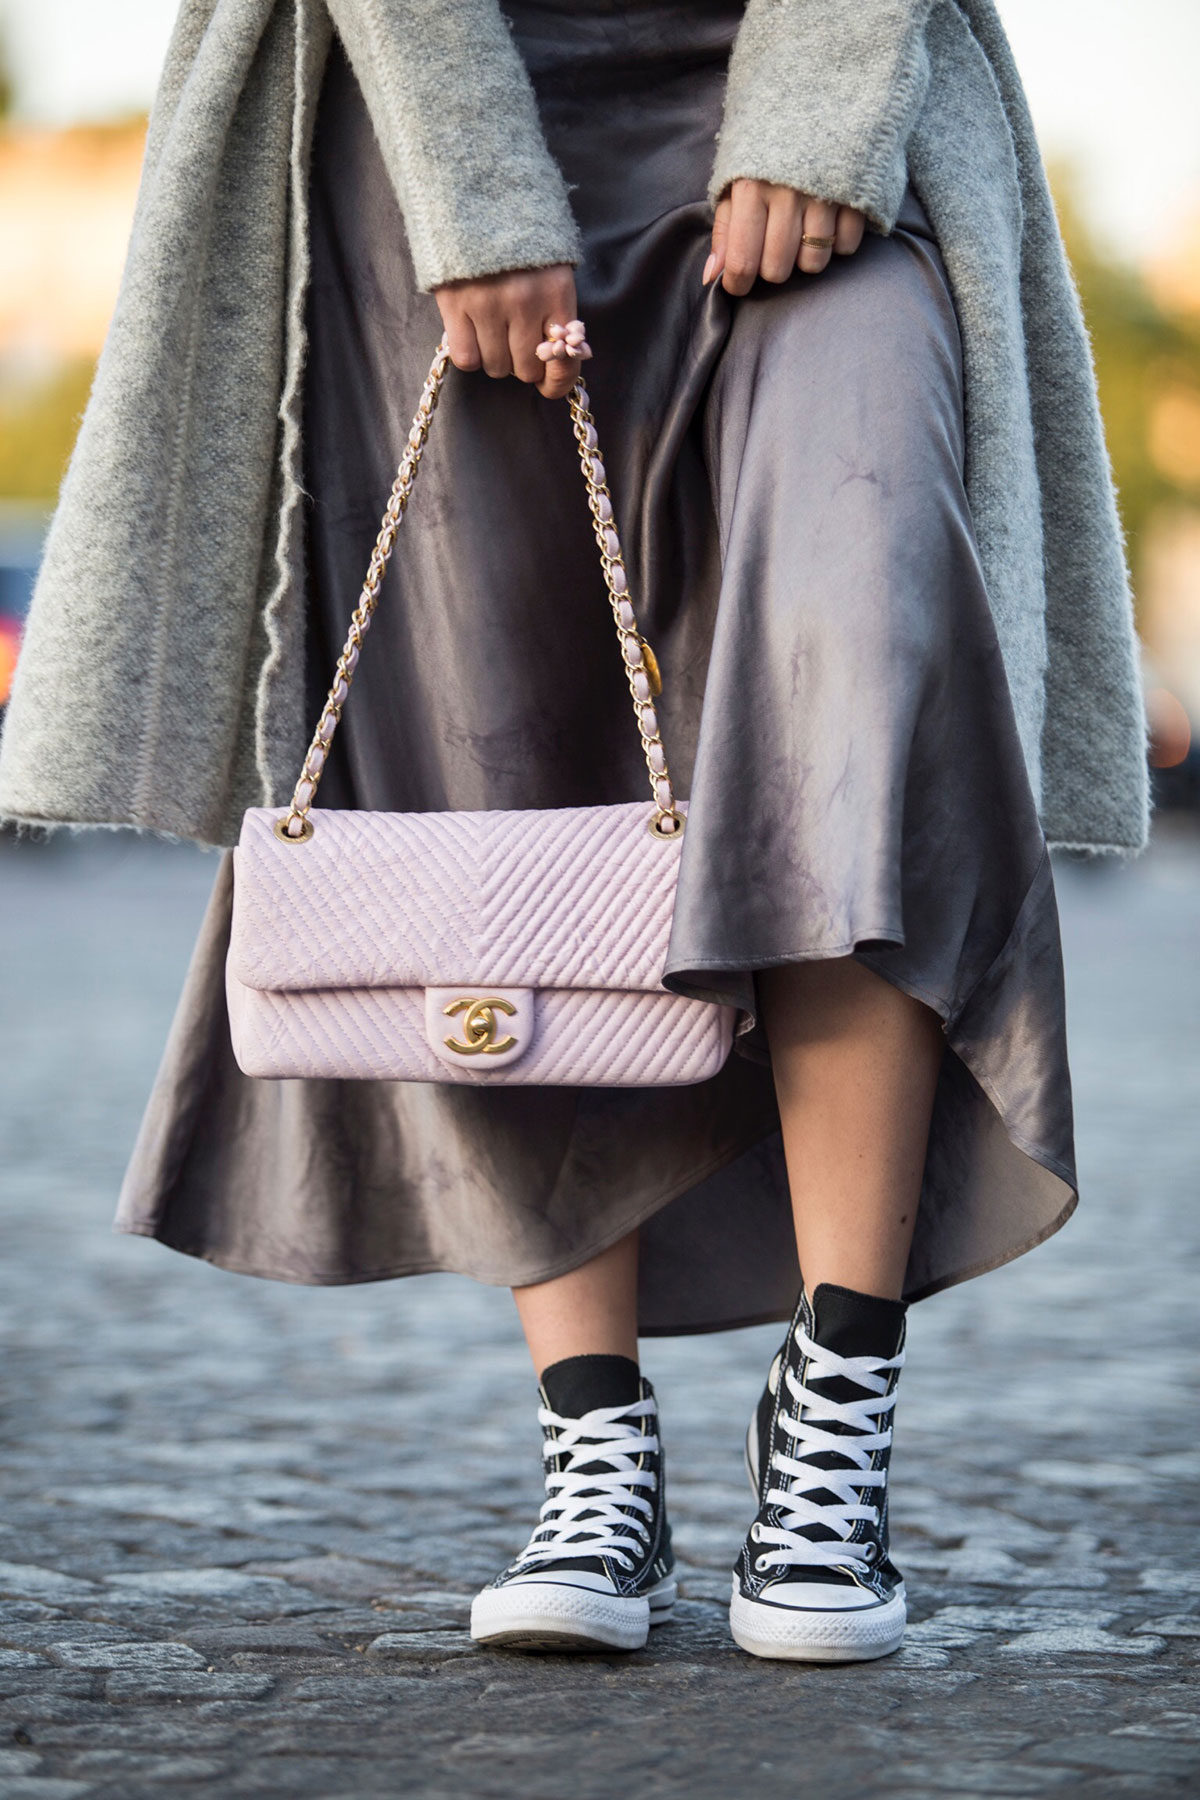 pink Chanel bag and Converse all star sneakers as seen on Stella Asteria - Fashion & Lifestyle Blogger